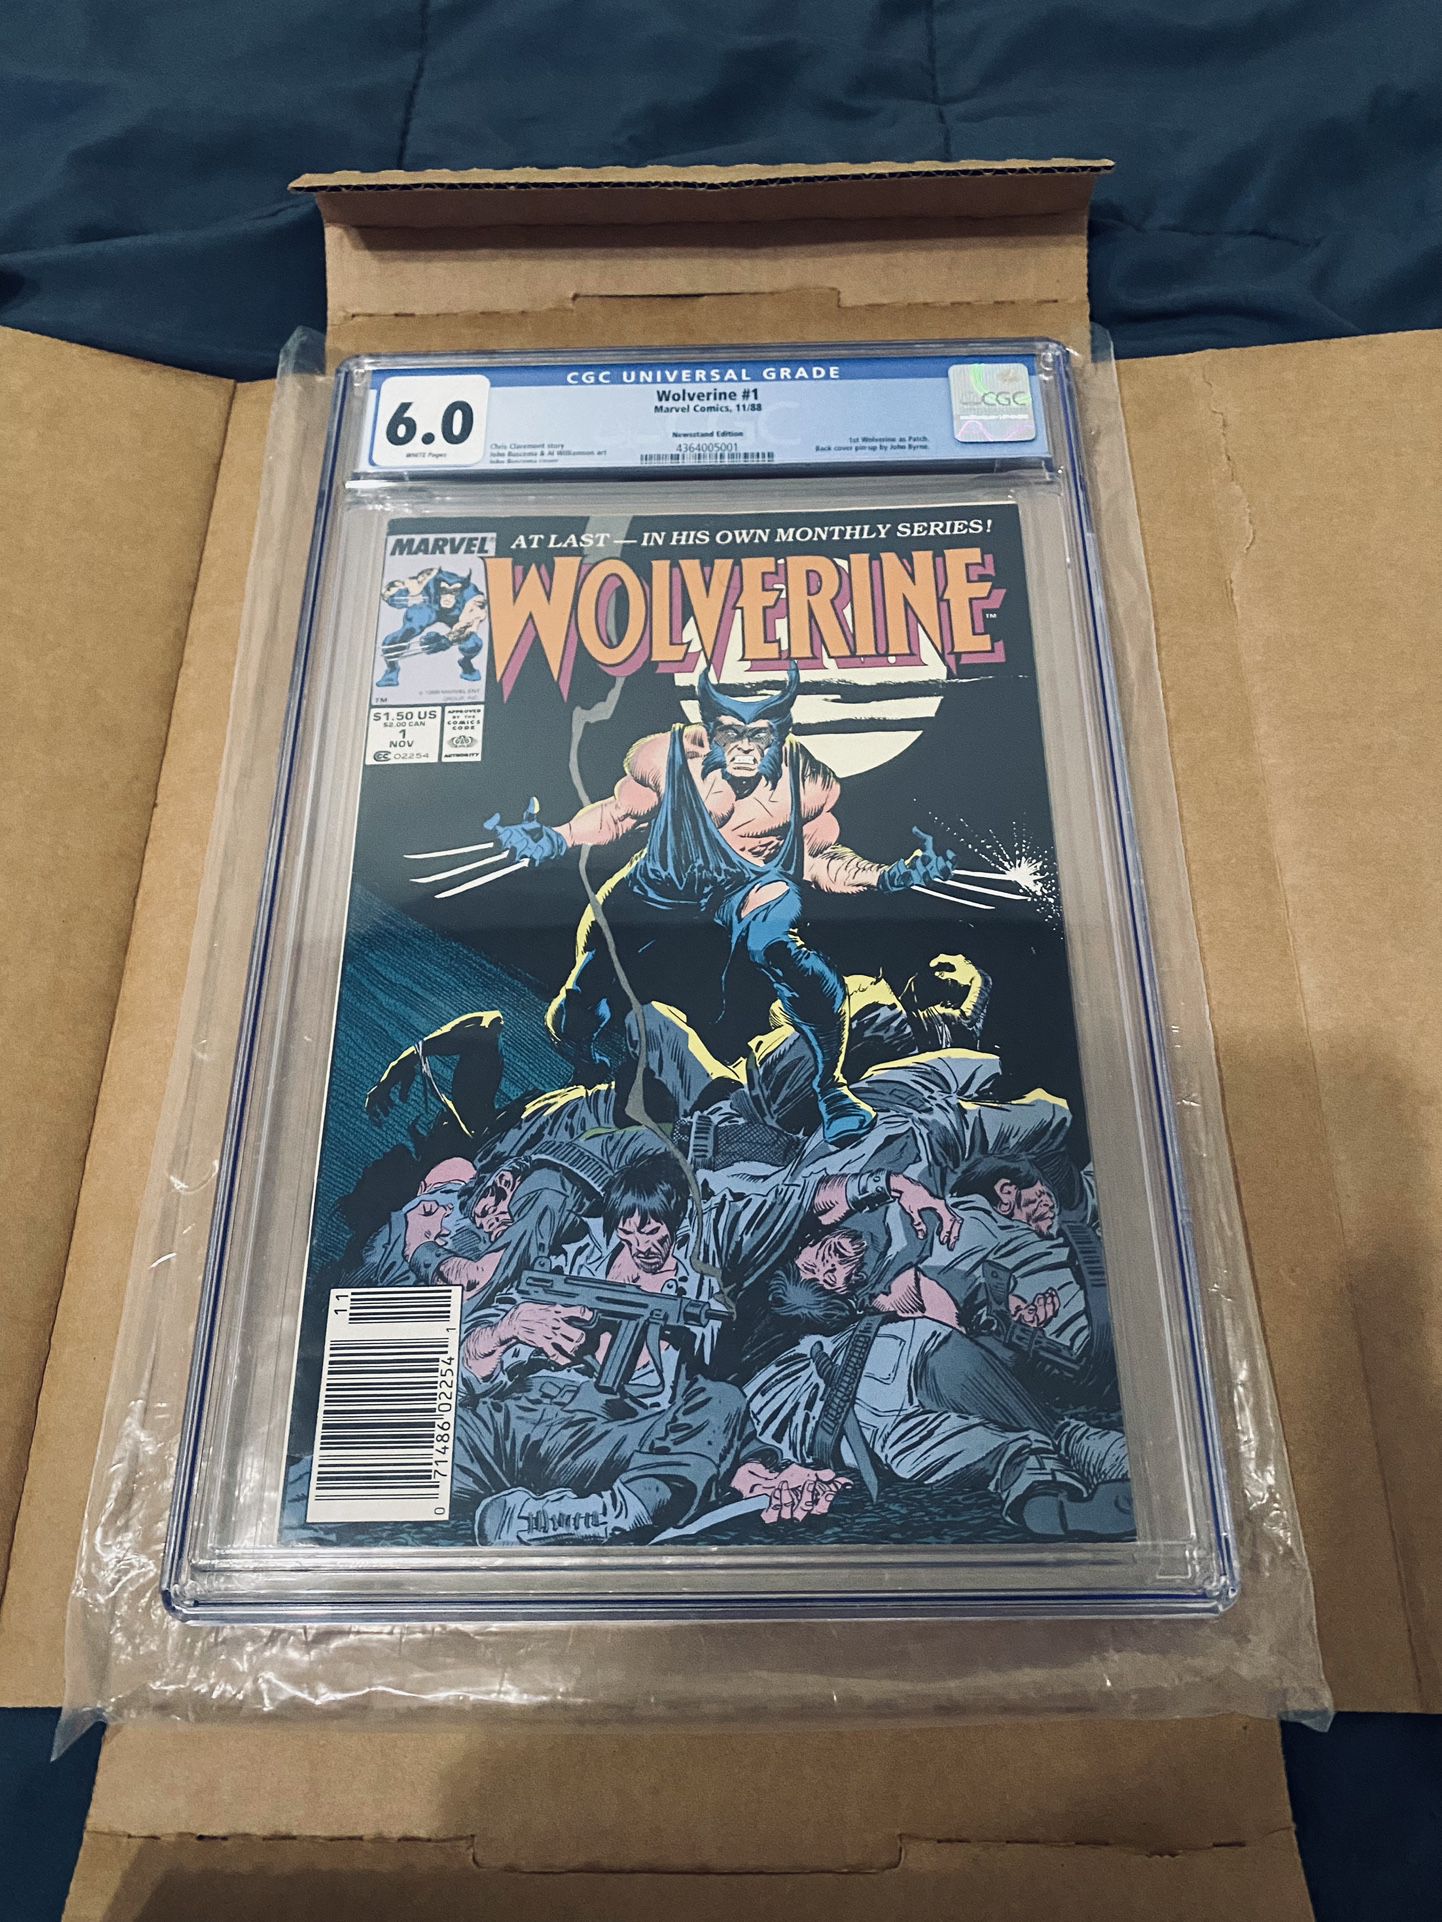 Marvel Comics, 1988 Wolverine 1 Cgc 6.0 Newsstand Edition. Key Issue & wolverine Vs Sabertooth #17 9.8  Adult Owned Purchase For Collecting. 